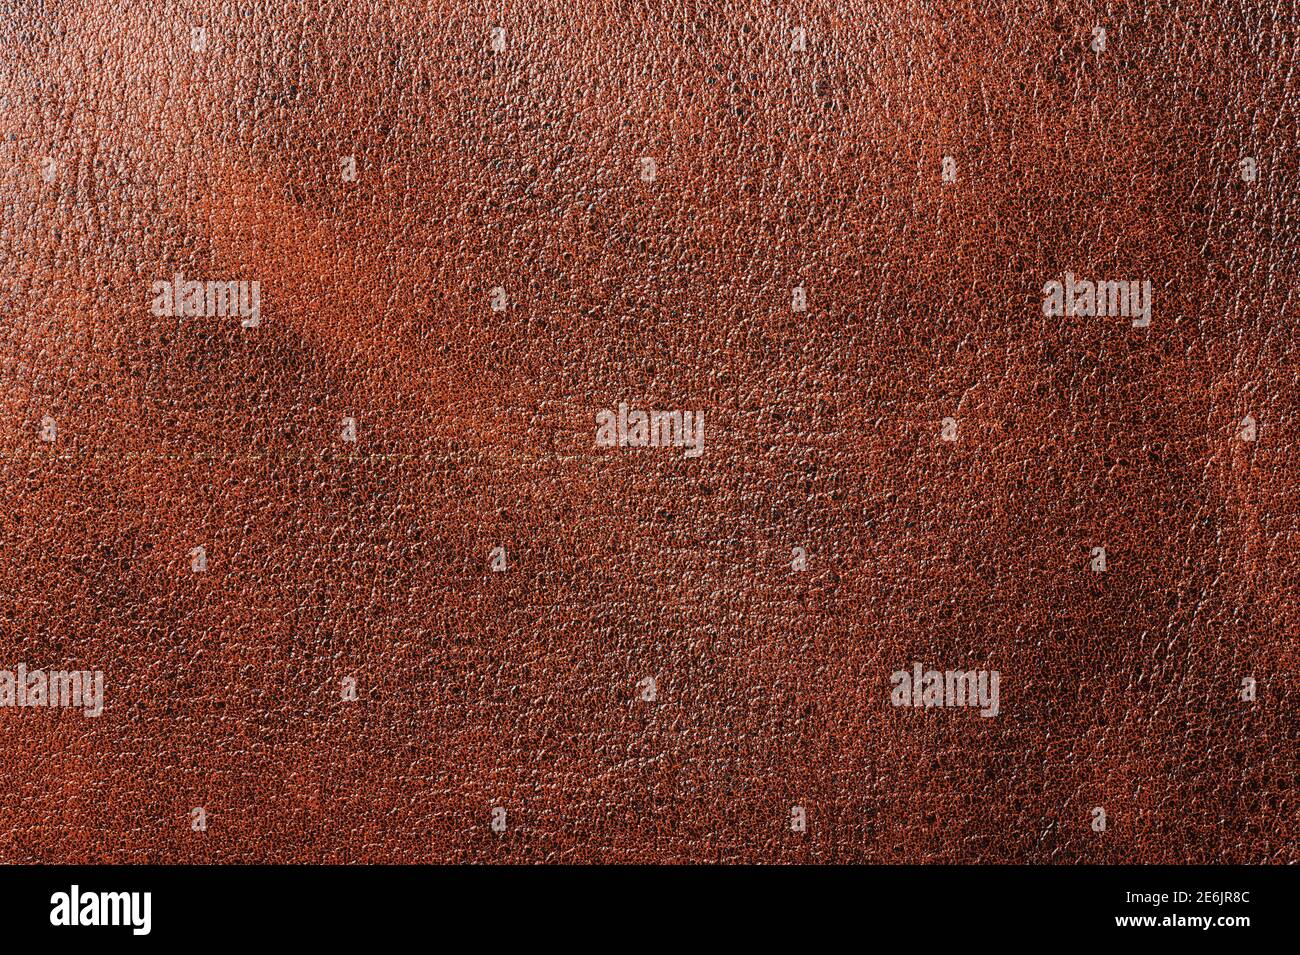 Dark brown leather material surface macro close up view Stock Photo